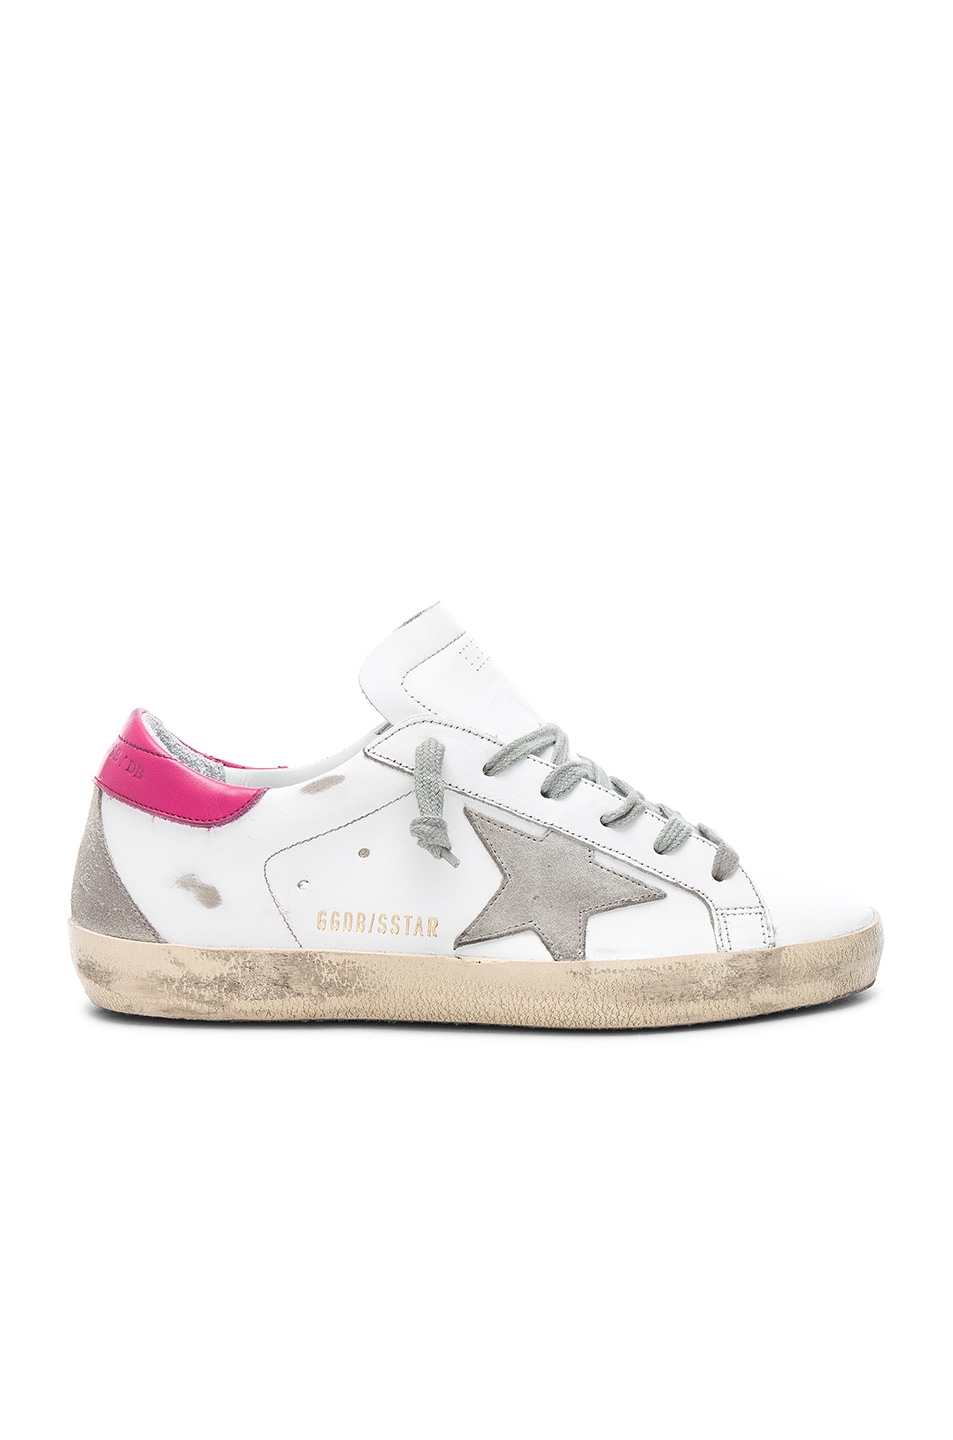 Image 1 of Golden Goose Leather Superstar Sneakers in White, Magenta & Cream